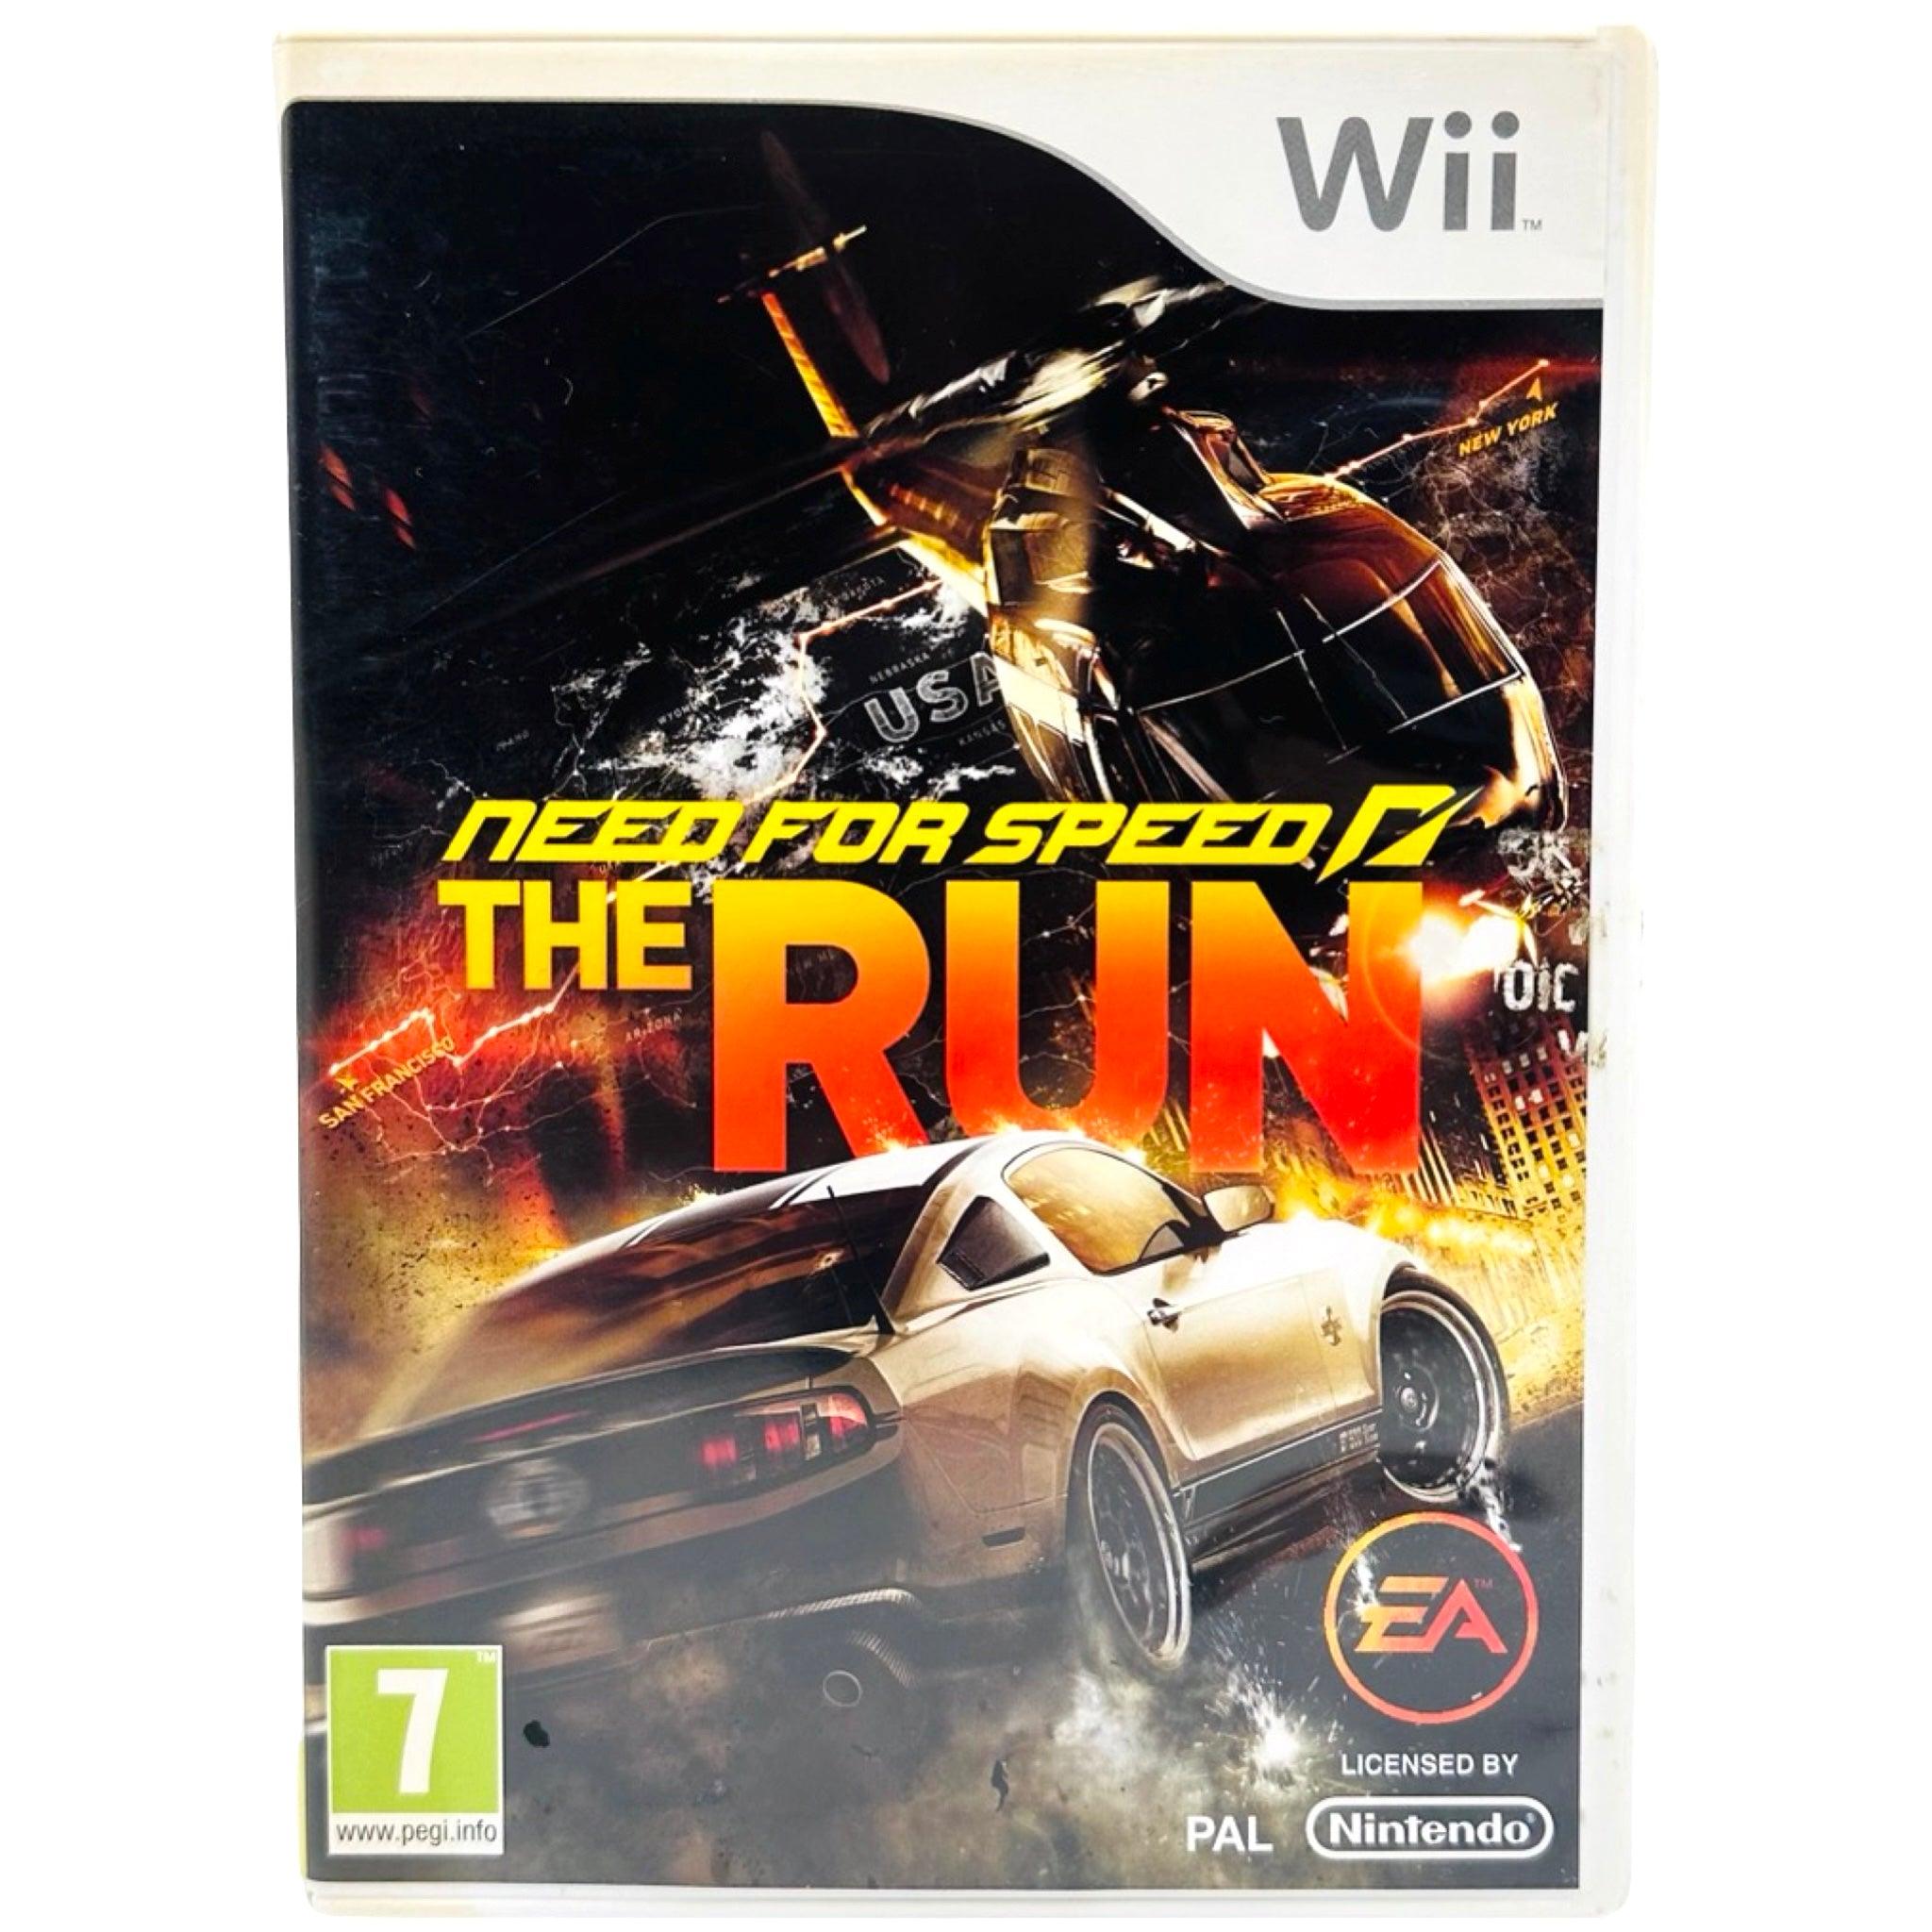 Wii: Need For Speed: The Run - RetroGaming.no